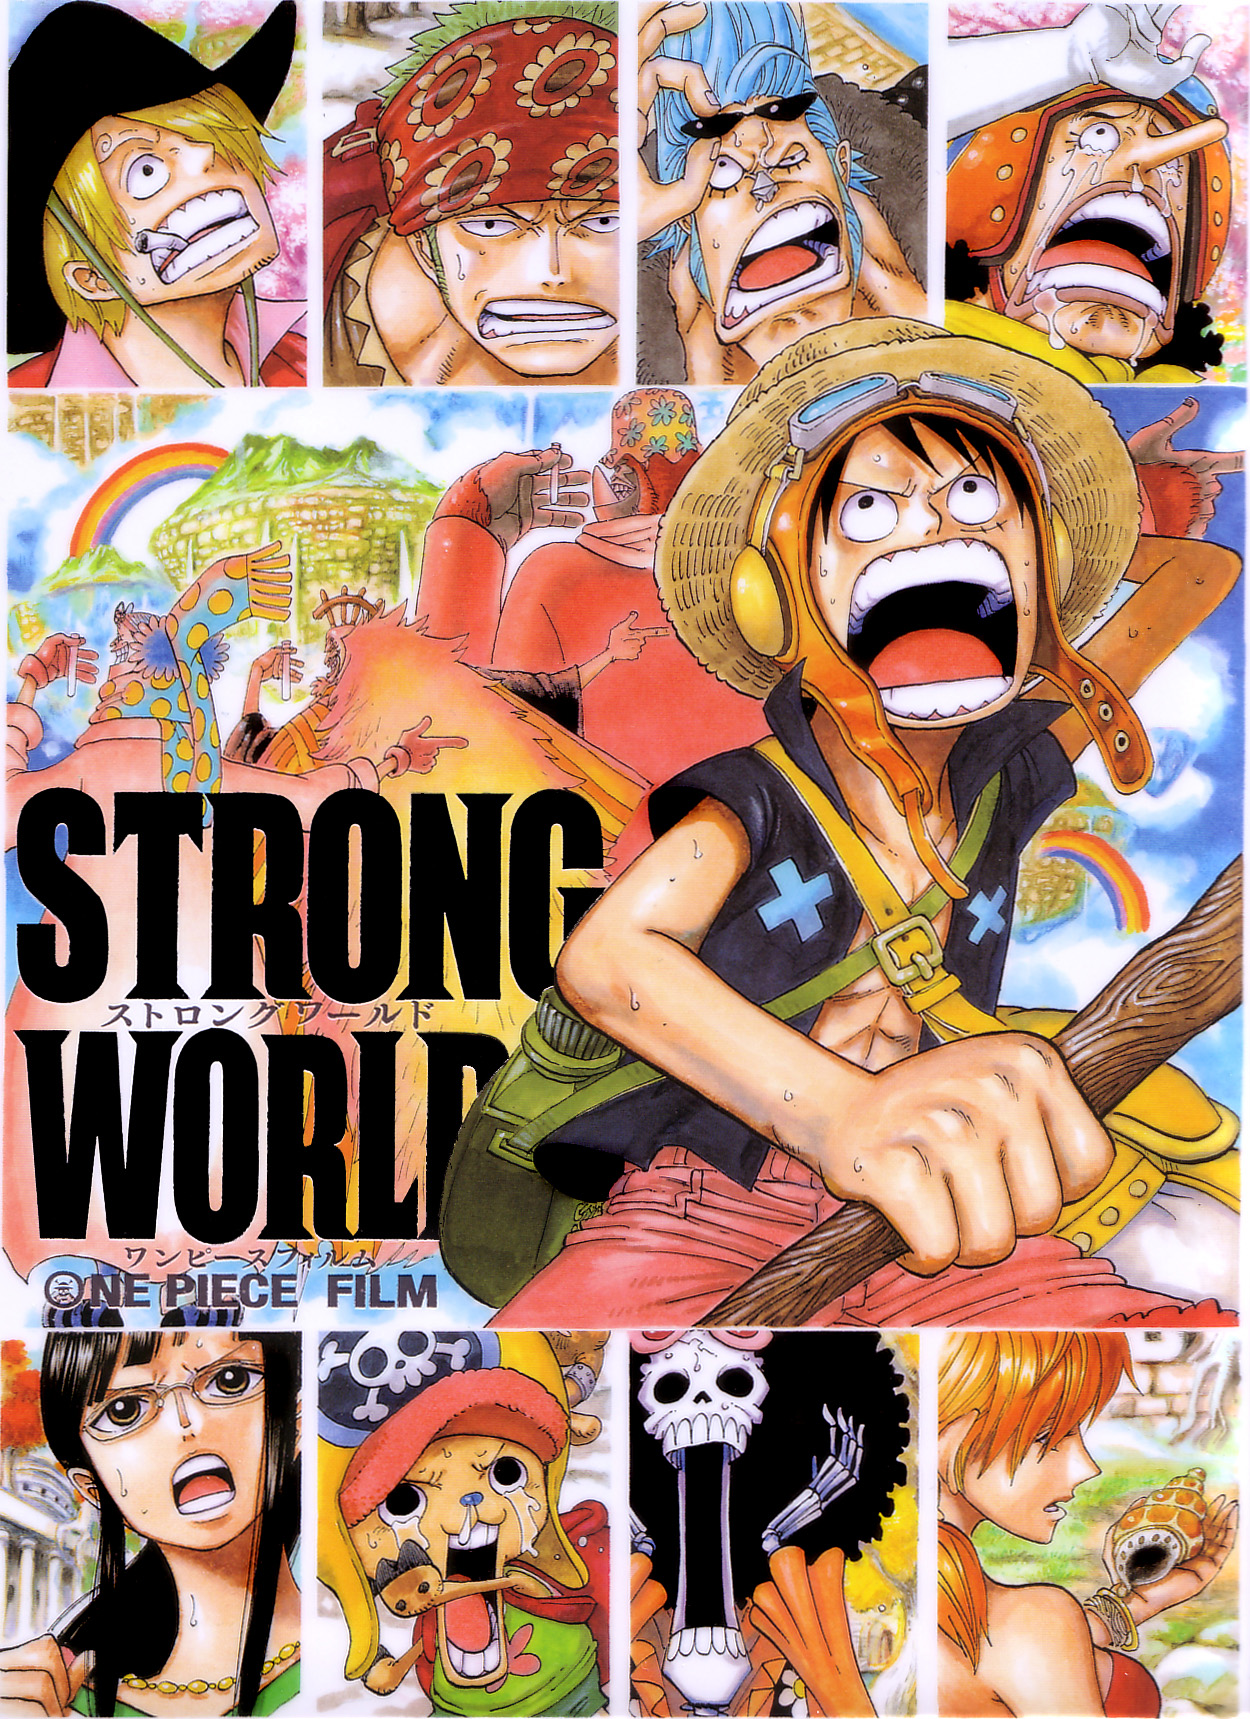 One piece all episode torrent download